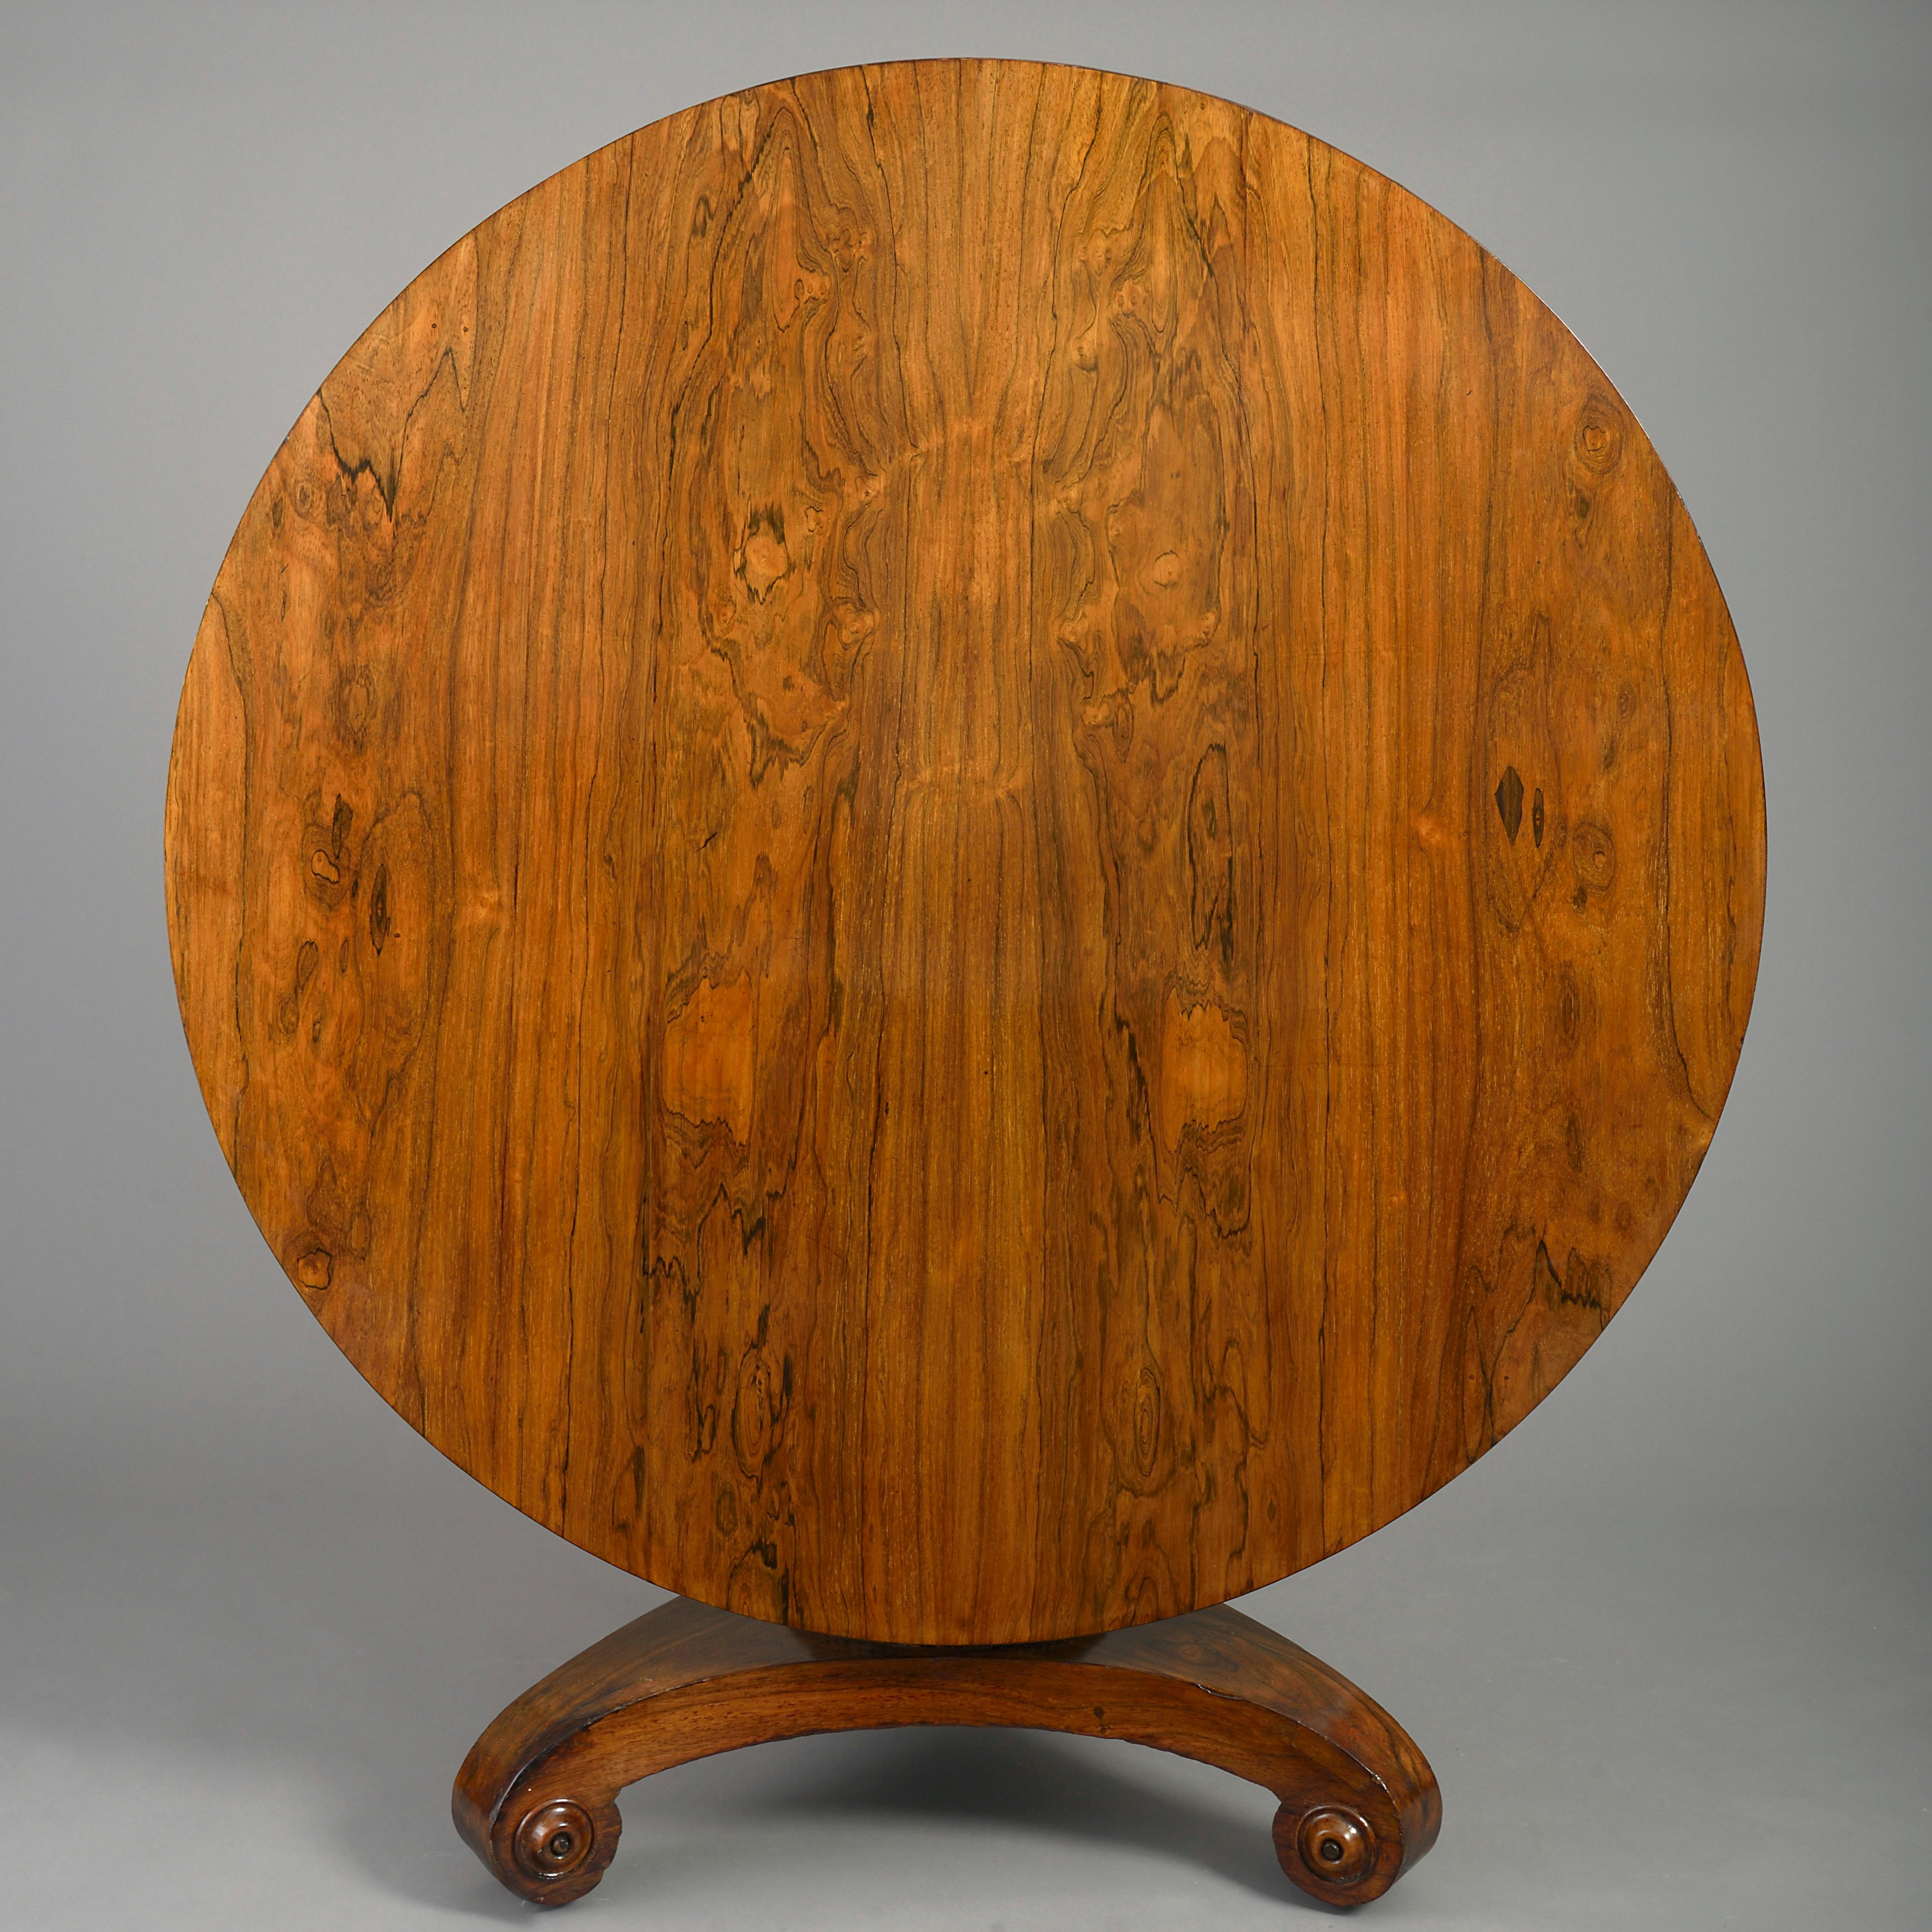 English Early 19th Century Regency Period Rosewood Centre Table